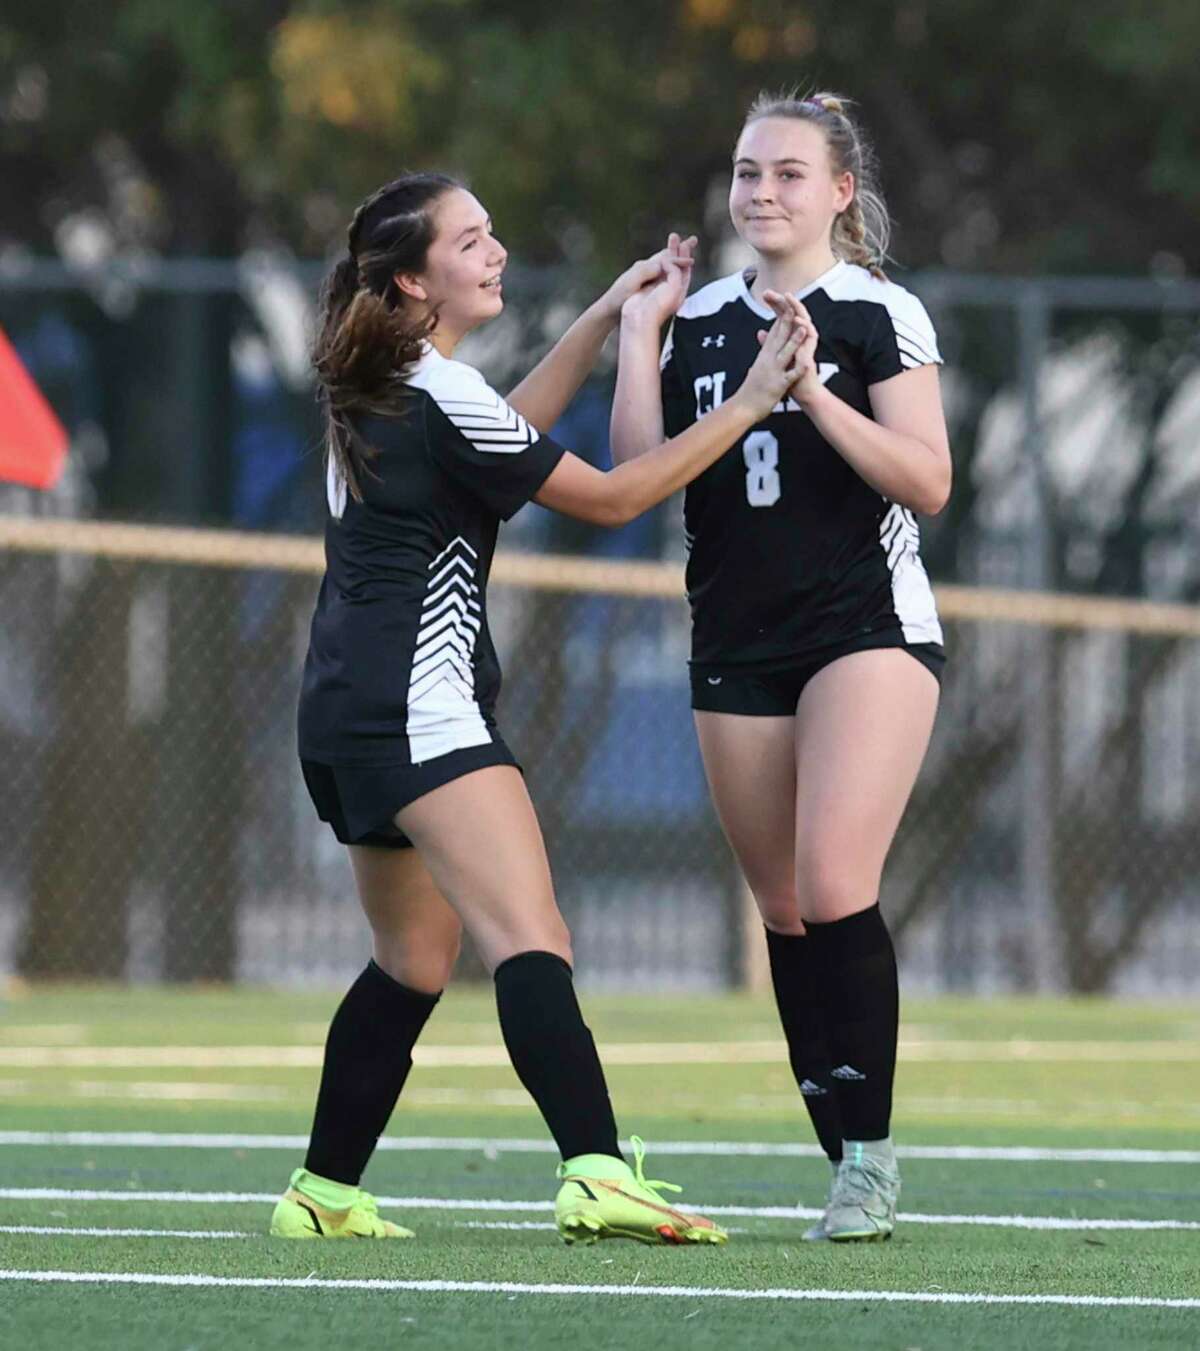 Clark's Emily Hight (08) gets congratulated by Logan Garza (06) after Hight scores one of her three goals against Clemens in girls soccer playoffs at Farris Stadium on Friday, Mar. 25, 2022. Clark defeated Clemens, 9-2, to move on in the next round of playoffs.